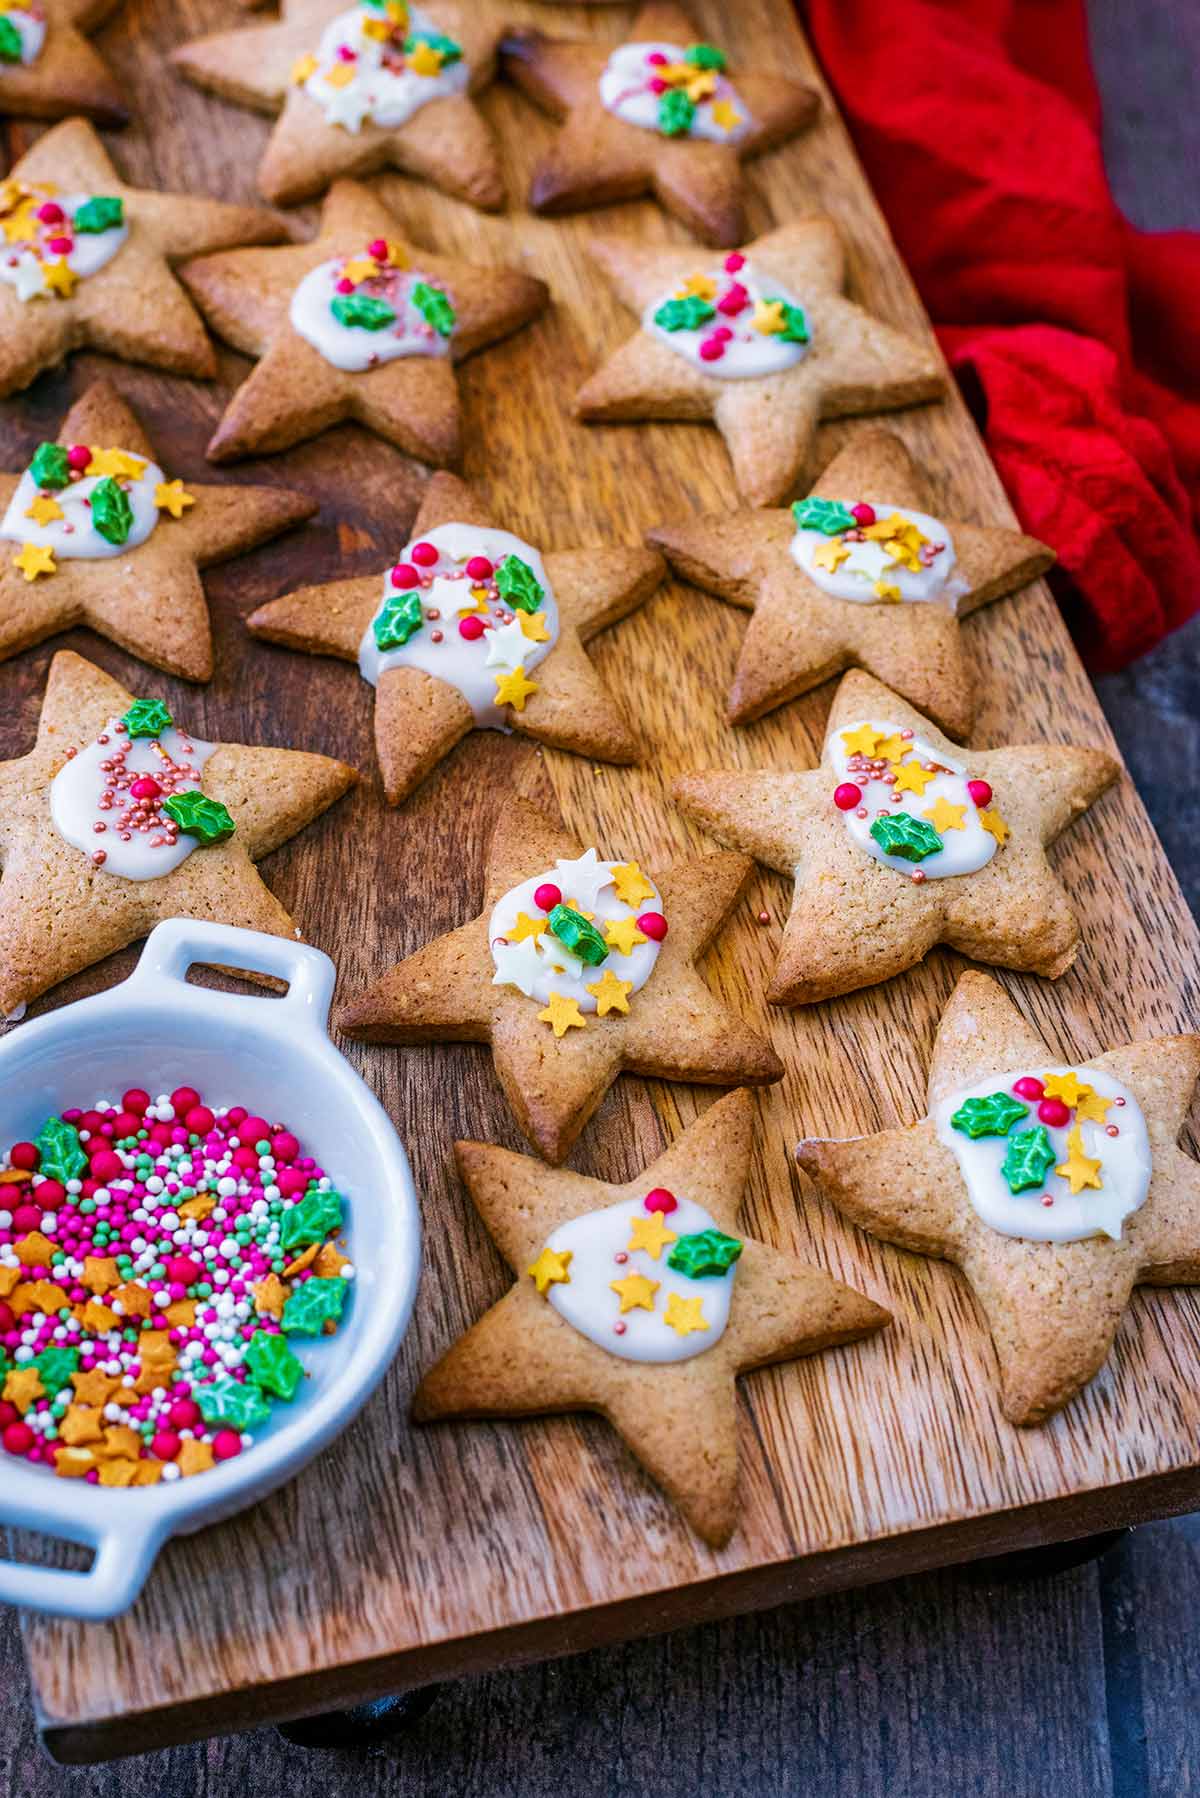 Star biscuits on a board wit ha small pot of Christmas sprinkles.